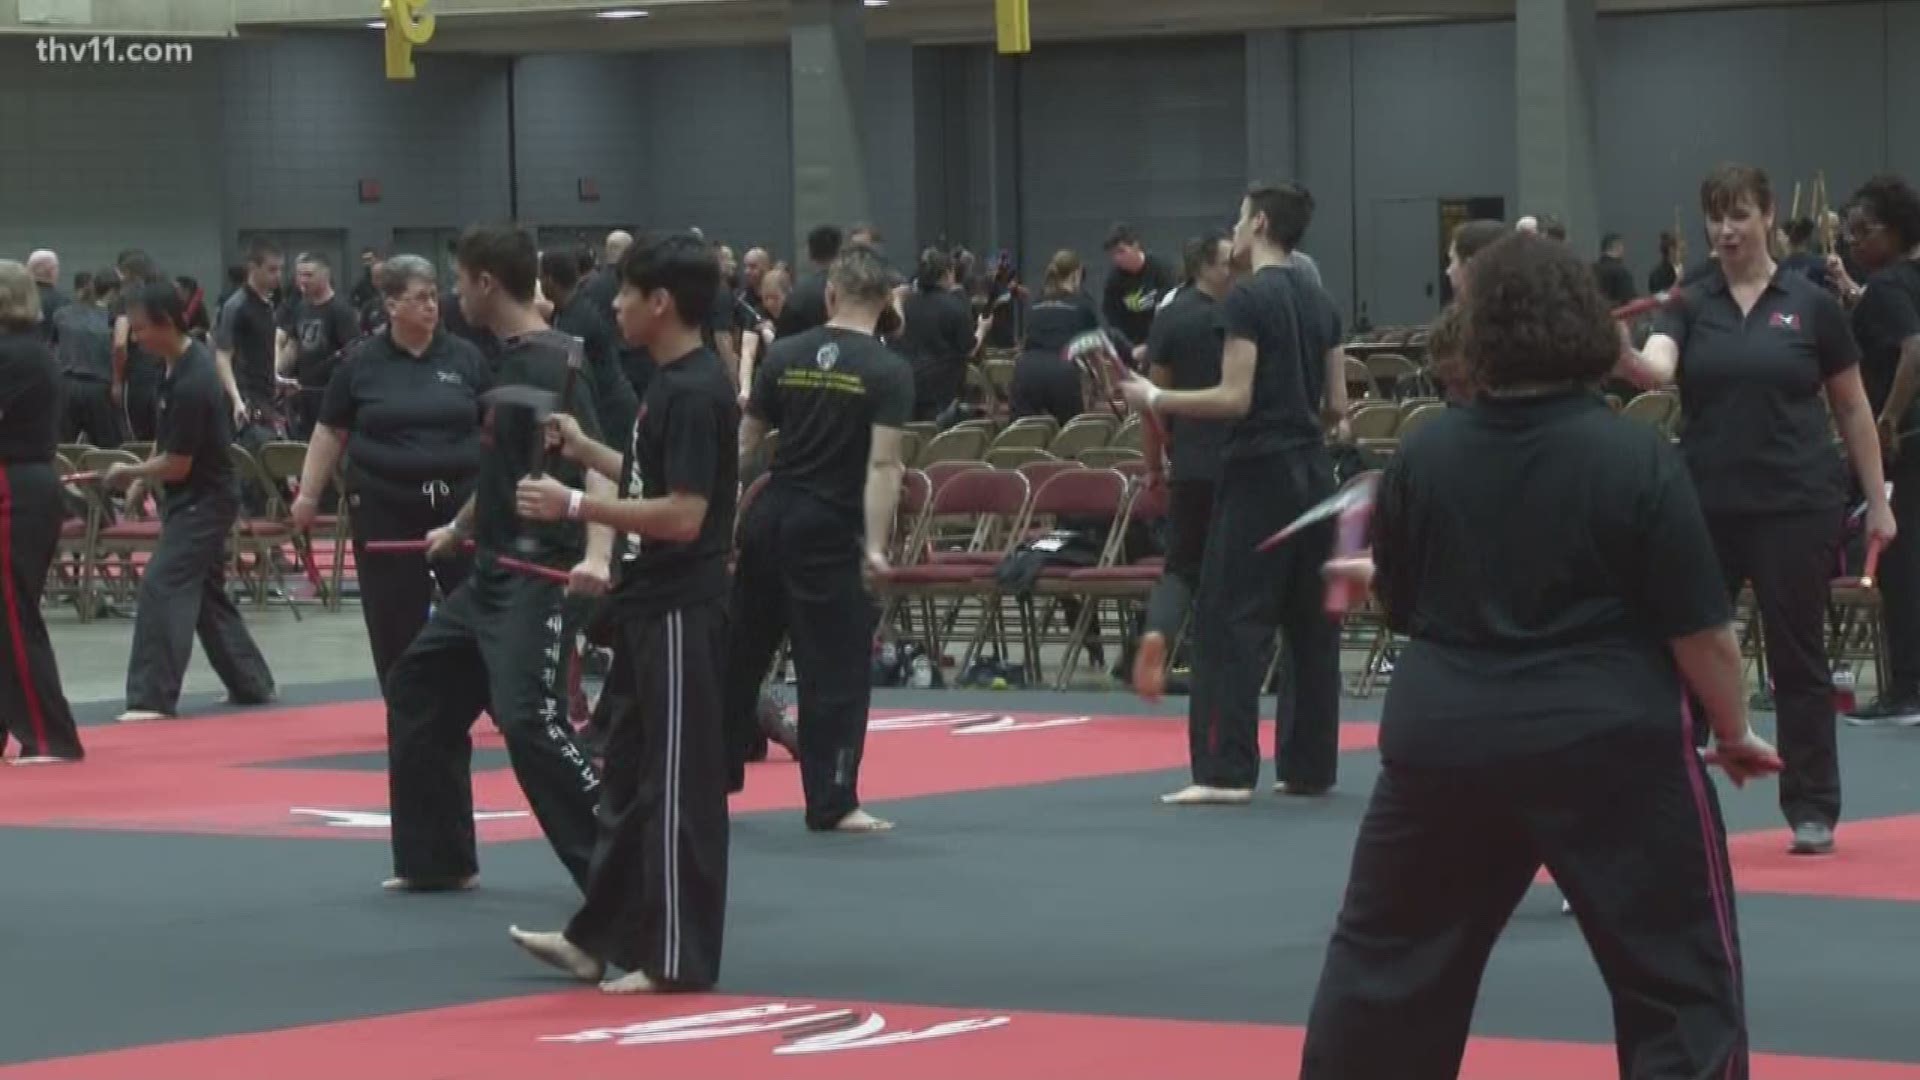 We want to welcome the thousands of people visiting Central Arkansas for the annual ATA Martial Arts World Expo. The organization is headquartered in Little Rock and has hosted the Expo here since 1990.